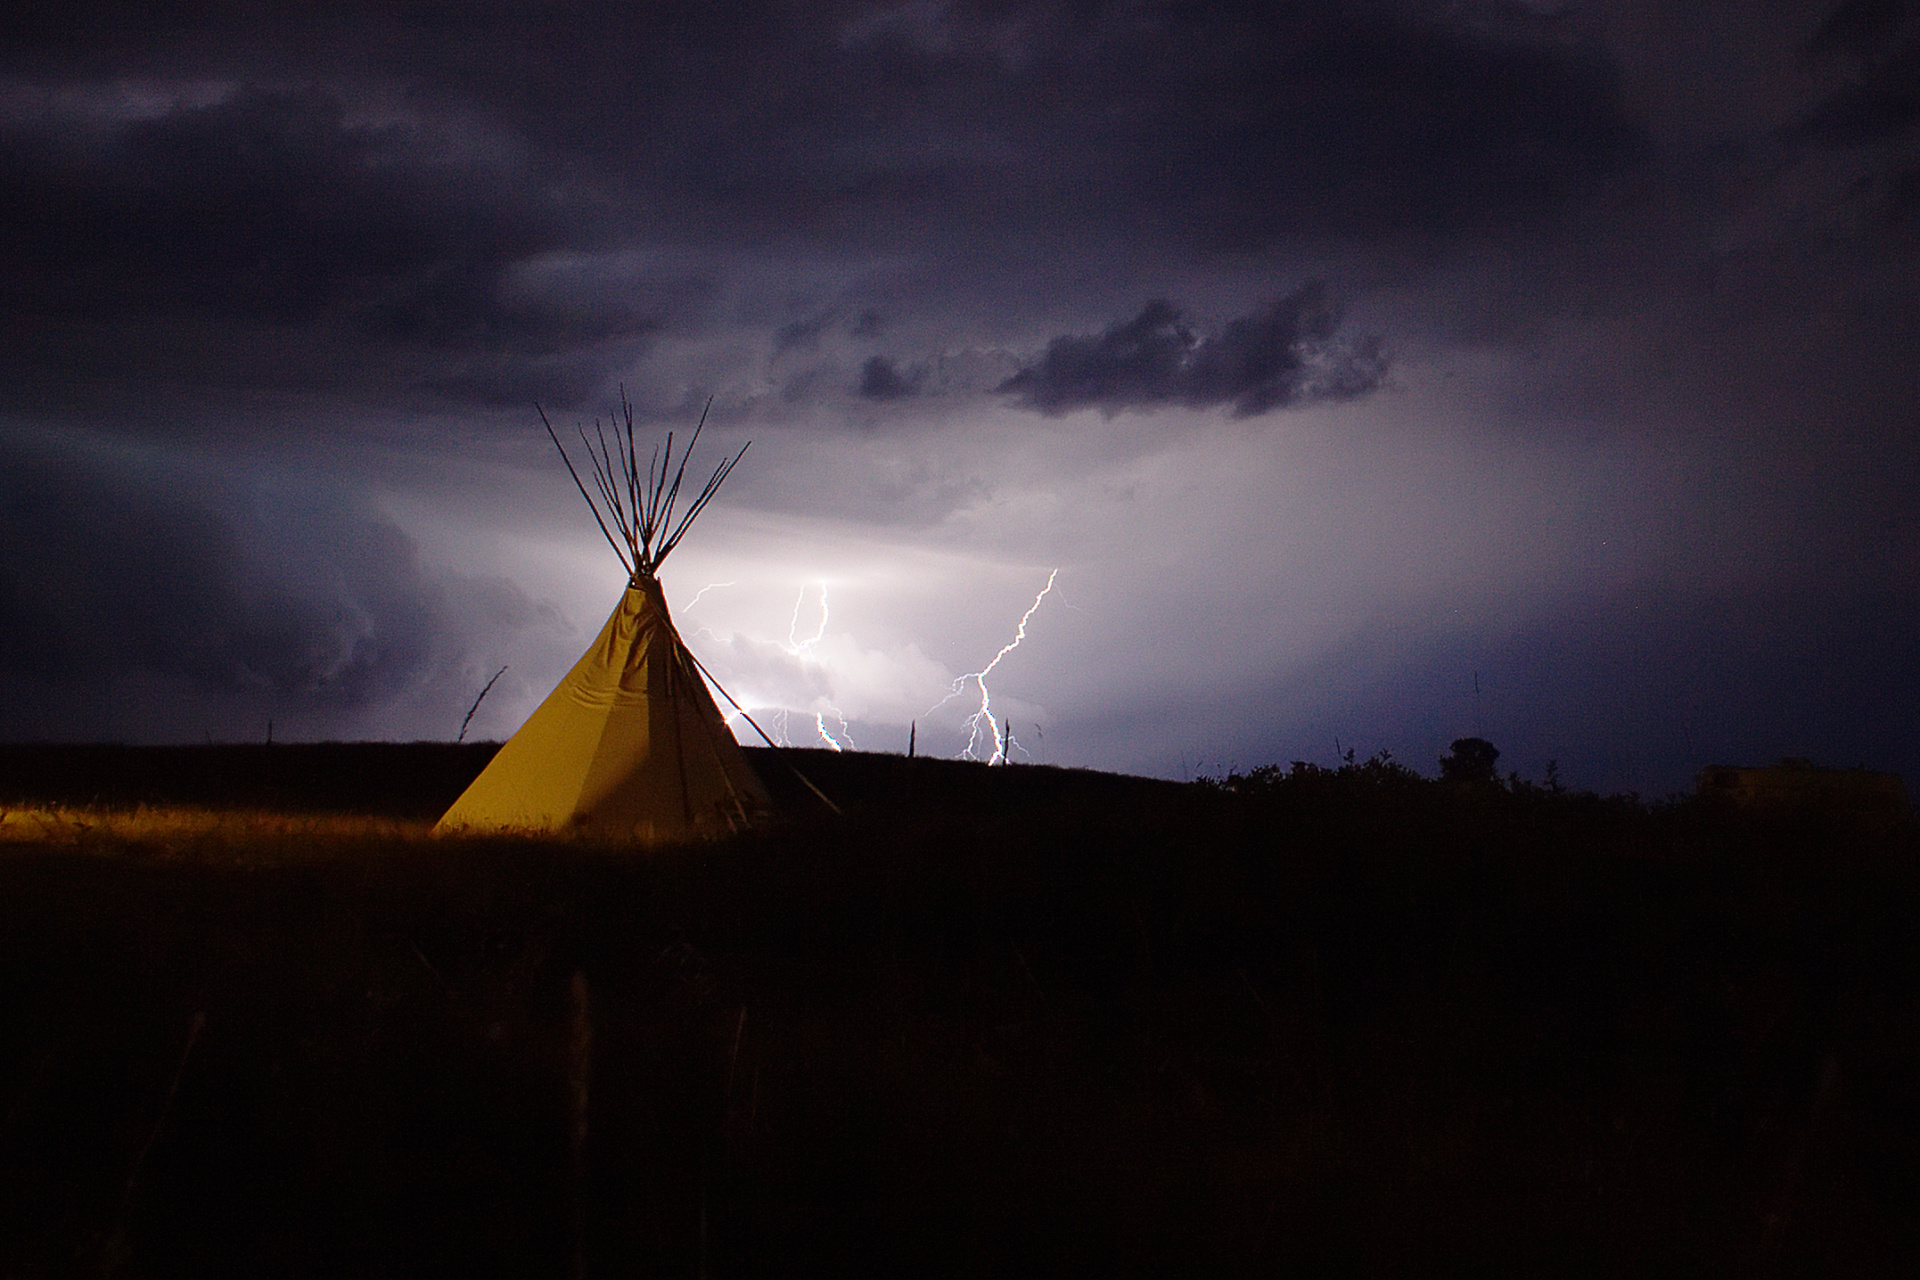 Thunderstorm (Travels » US Trip 1: Cheyenne Country » Teepees)